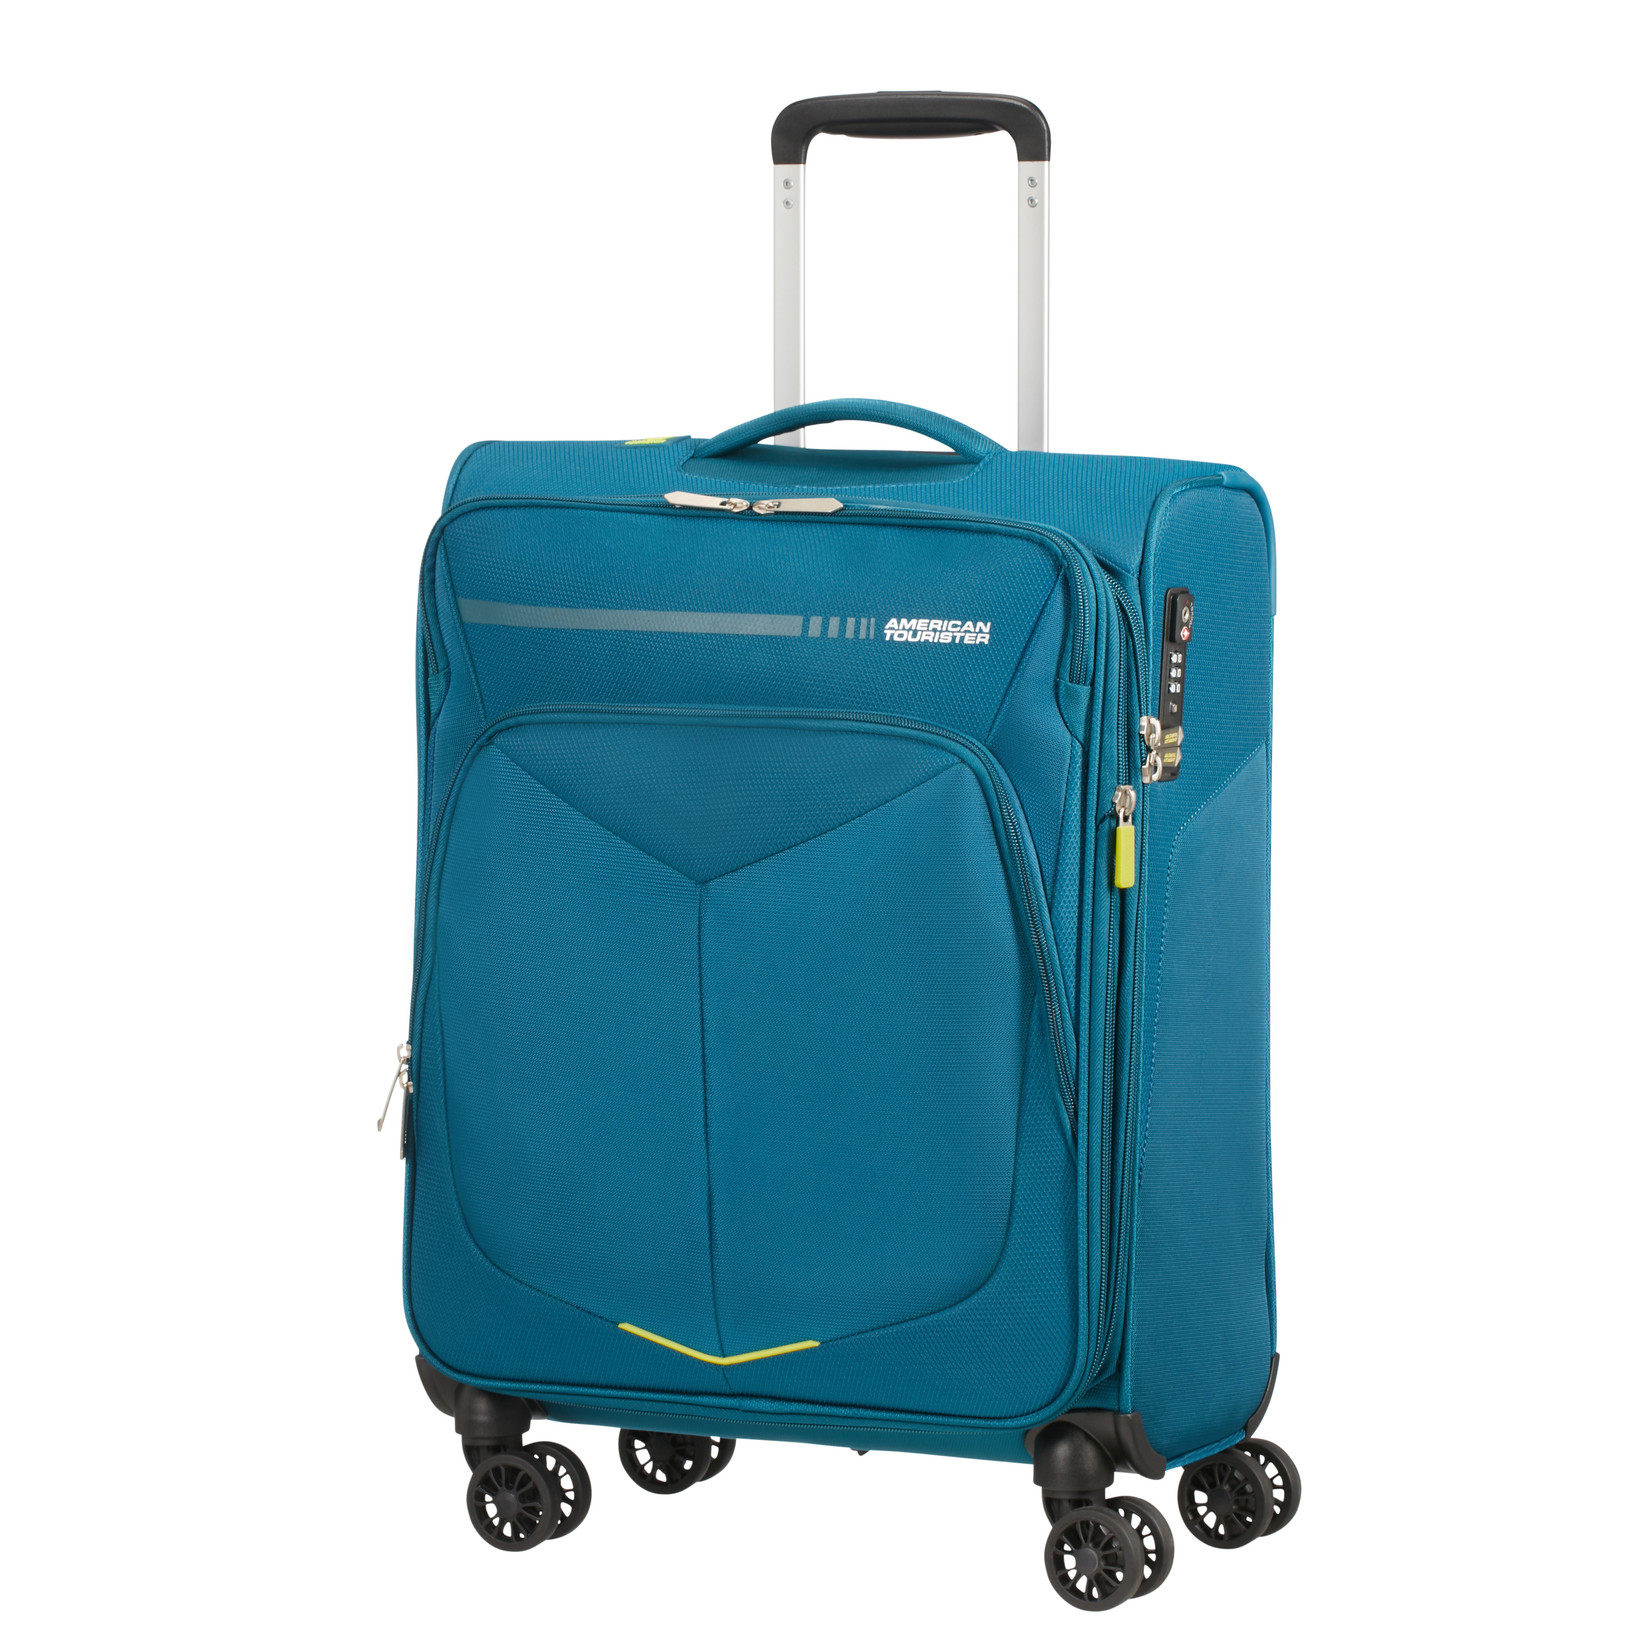 American Tourister American Tourister Summerfunk spinner 55 - teal